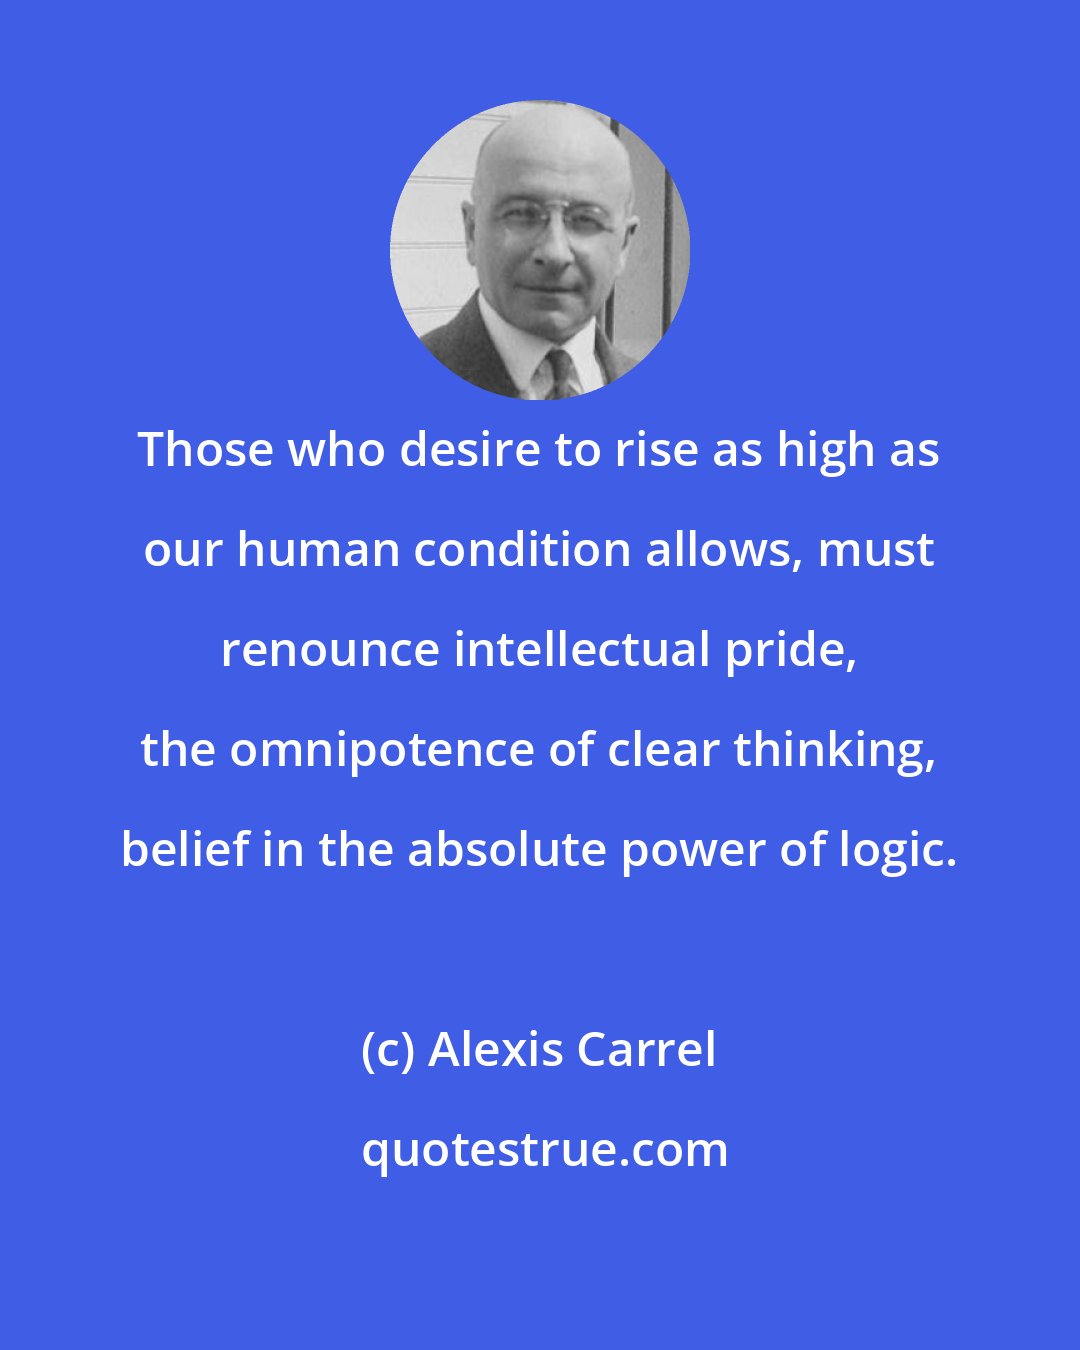 Alexis Carrel: Those who desire to rise as high as our human condition allows, must renounce intellectual pride, the omnipotence of clear thinking, belief in the absolute power of logic.